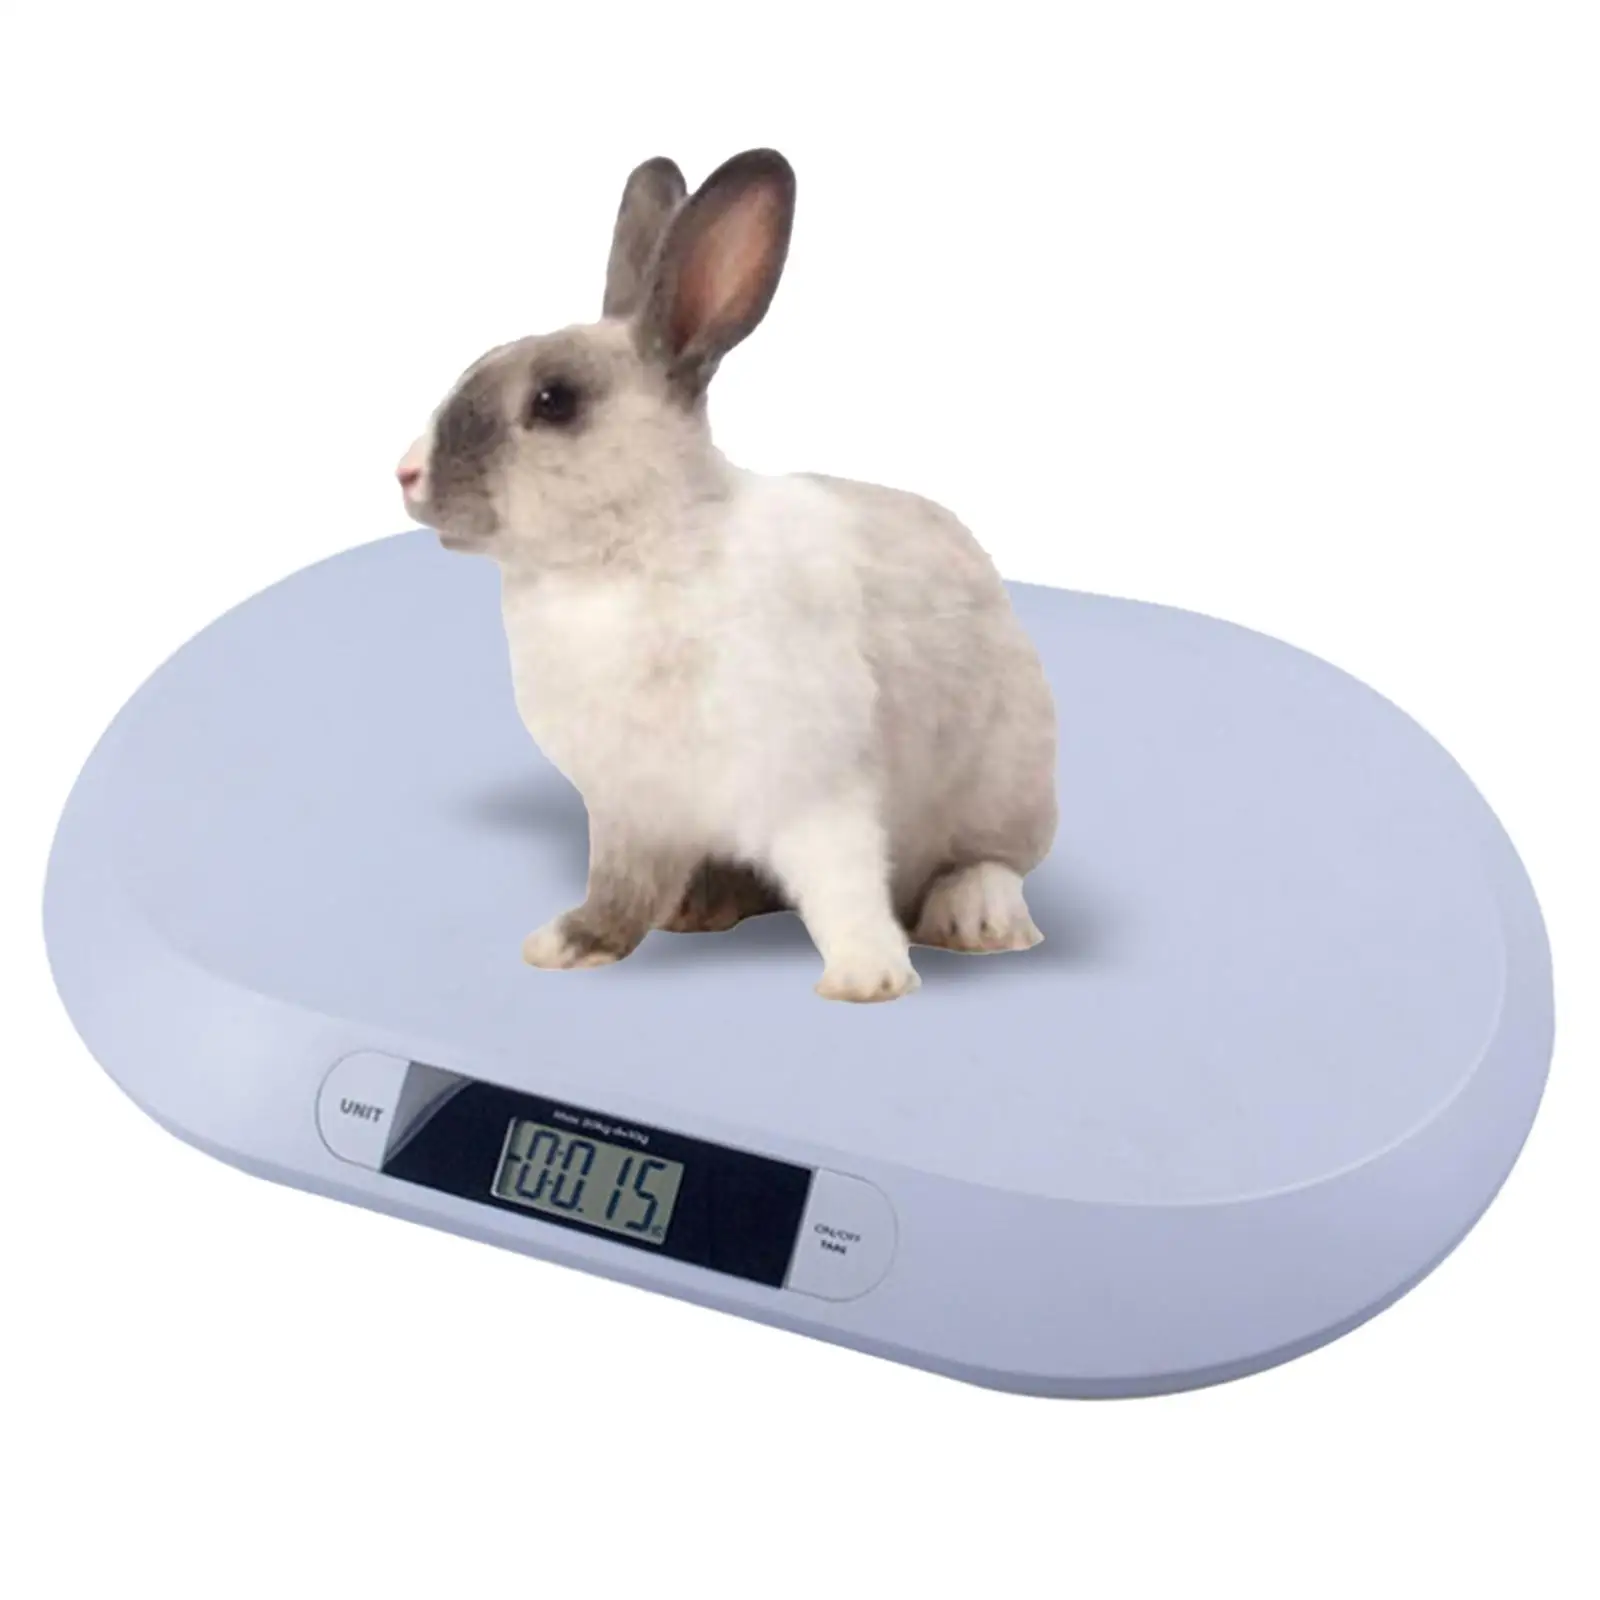 Smart Pet Scale 44.1lb Capacity Accurate Comfort LCD Display Multifunction Weigh Meter for Puppy Newborns Toddlers Infants Cats